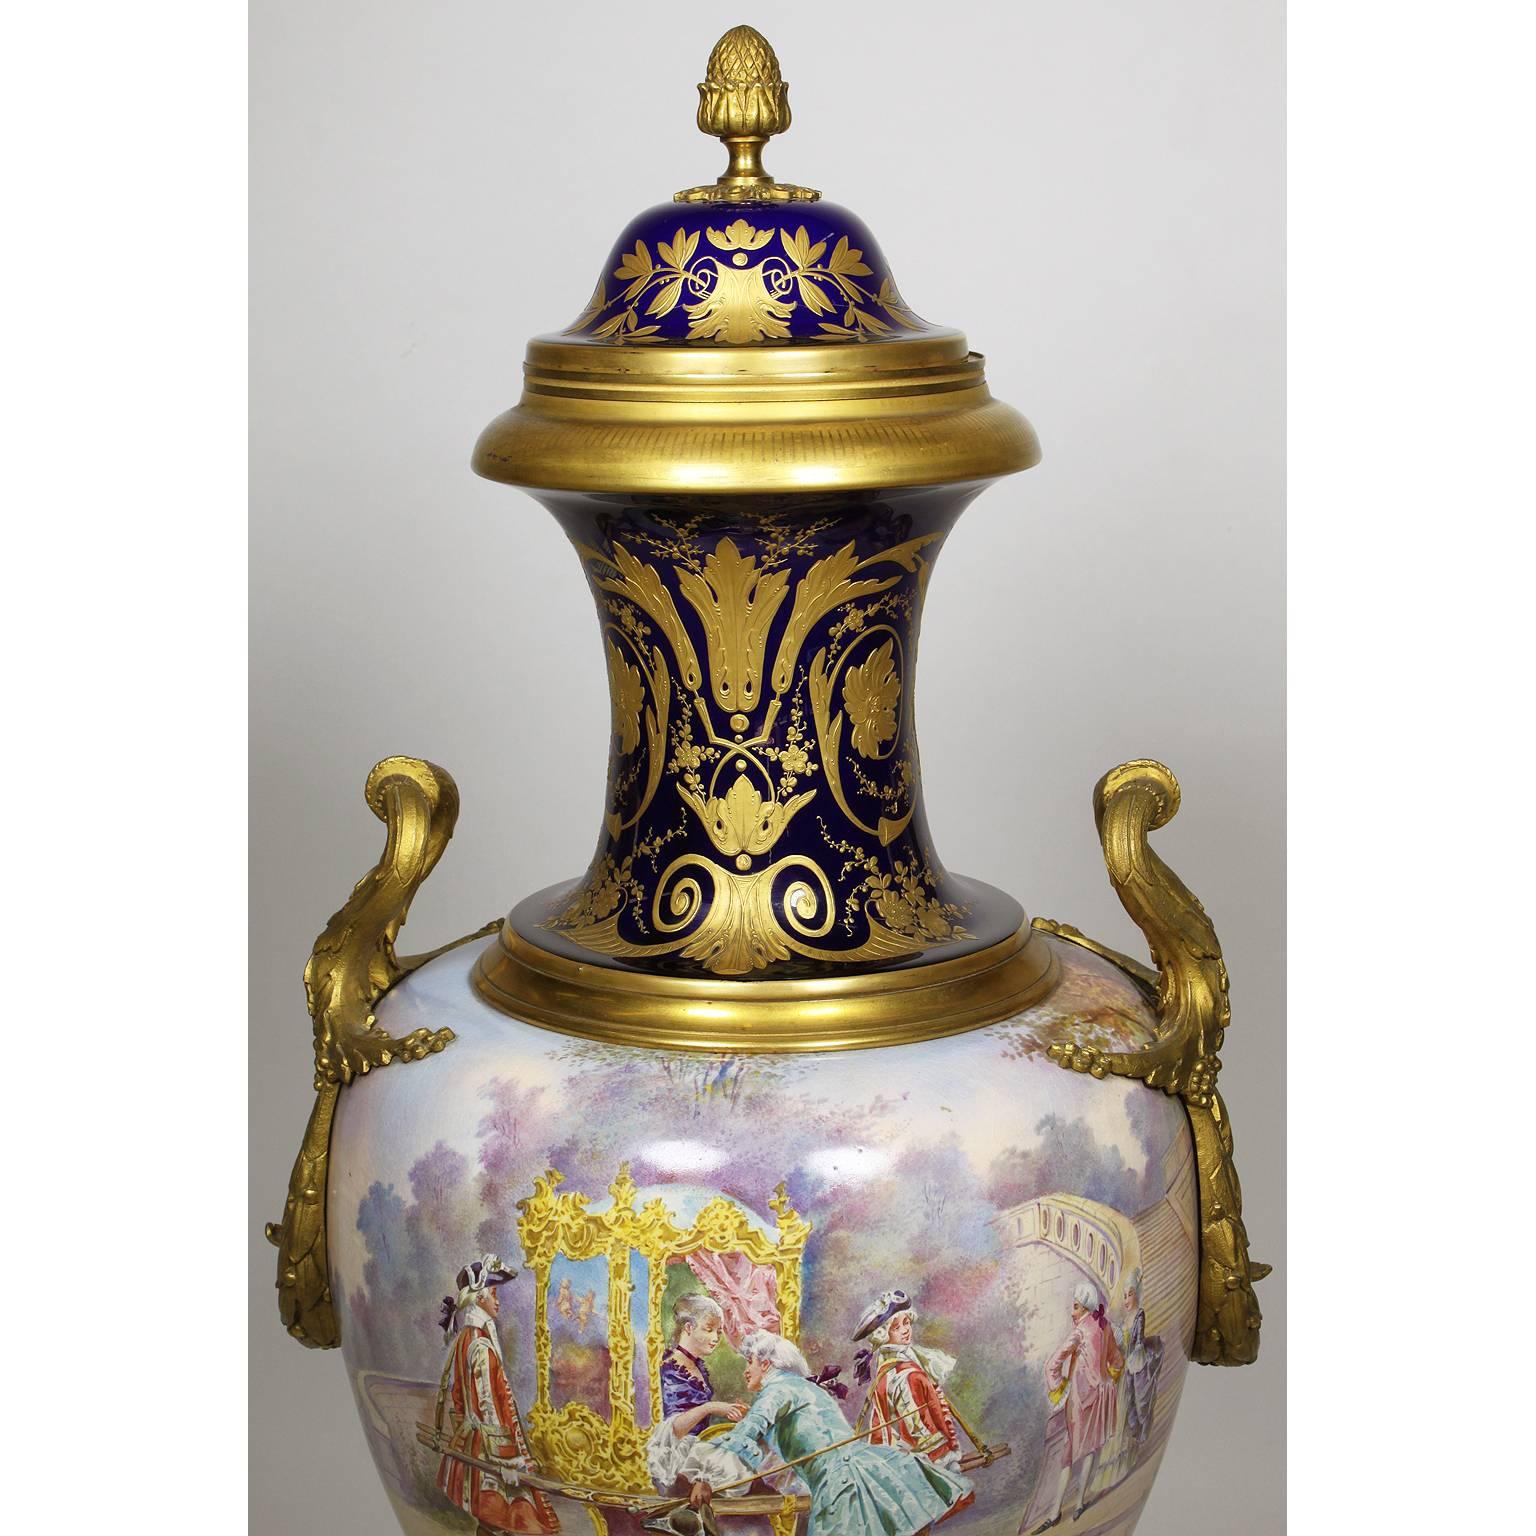 A very fine French 19th Century Napoleon III Sévres Style Porcelain and Ormolu Mounted Covered Urn, the 360 degree painted urn centered with an 18th century scene of a young Princess in palanquin with her attendants, the rear with scenes of a